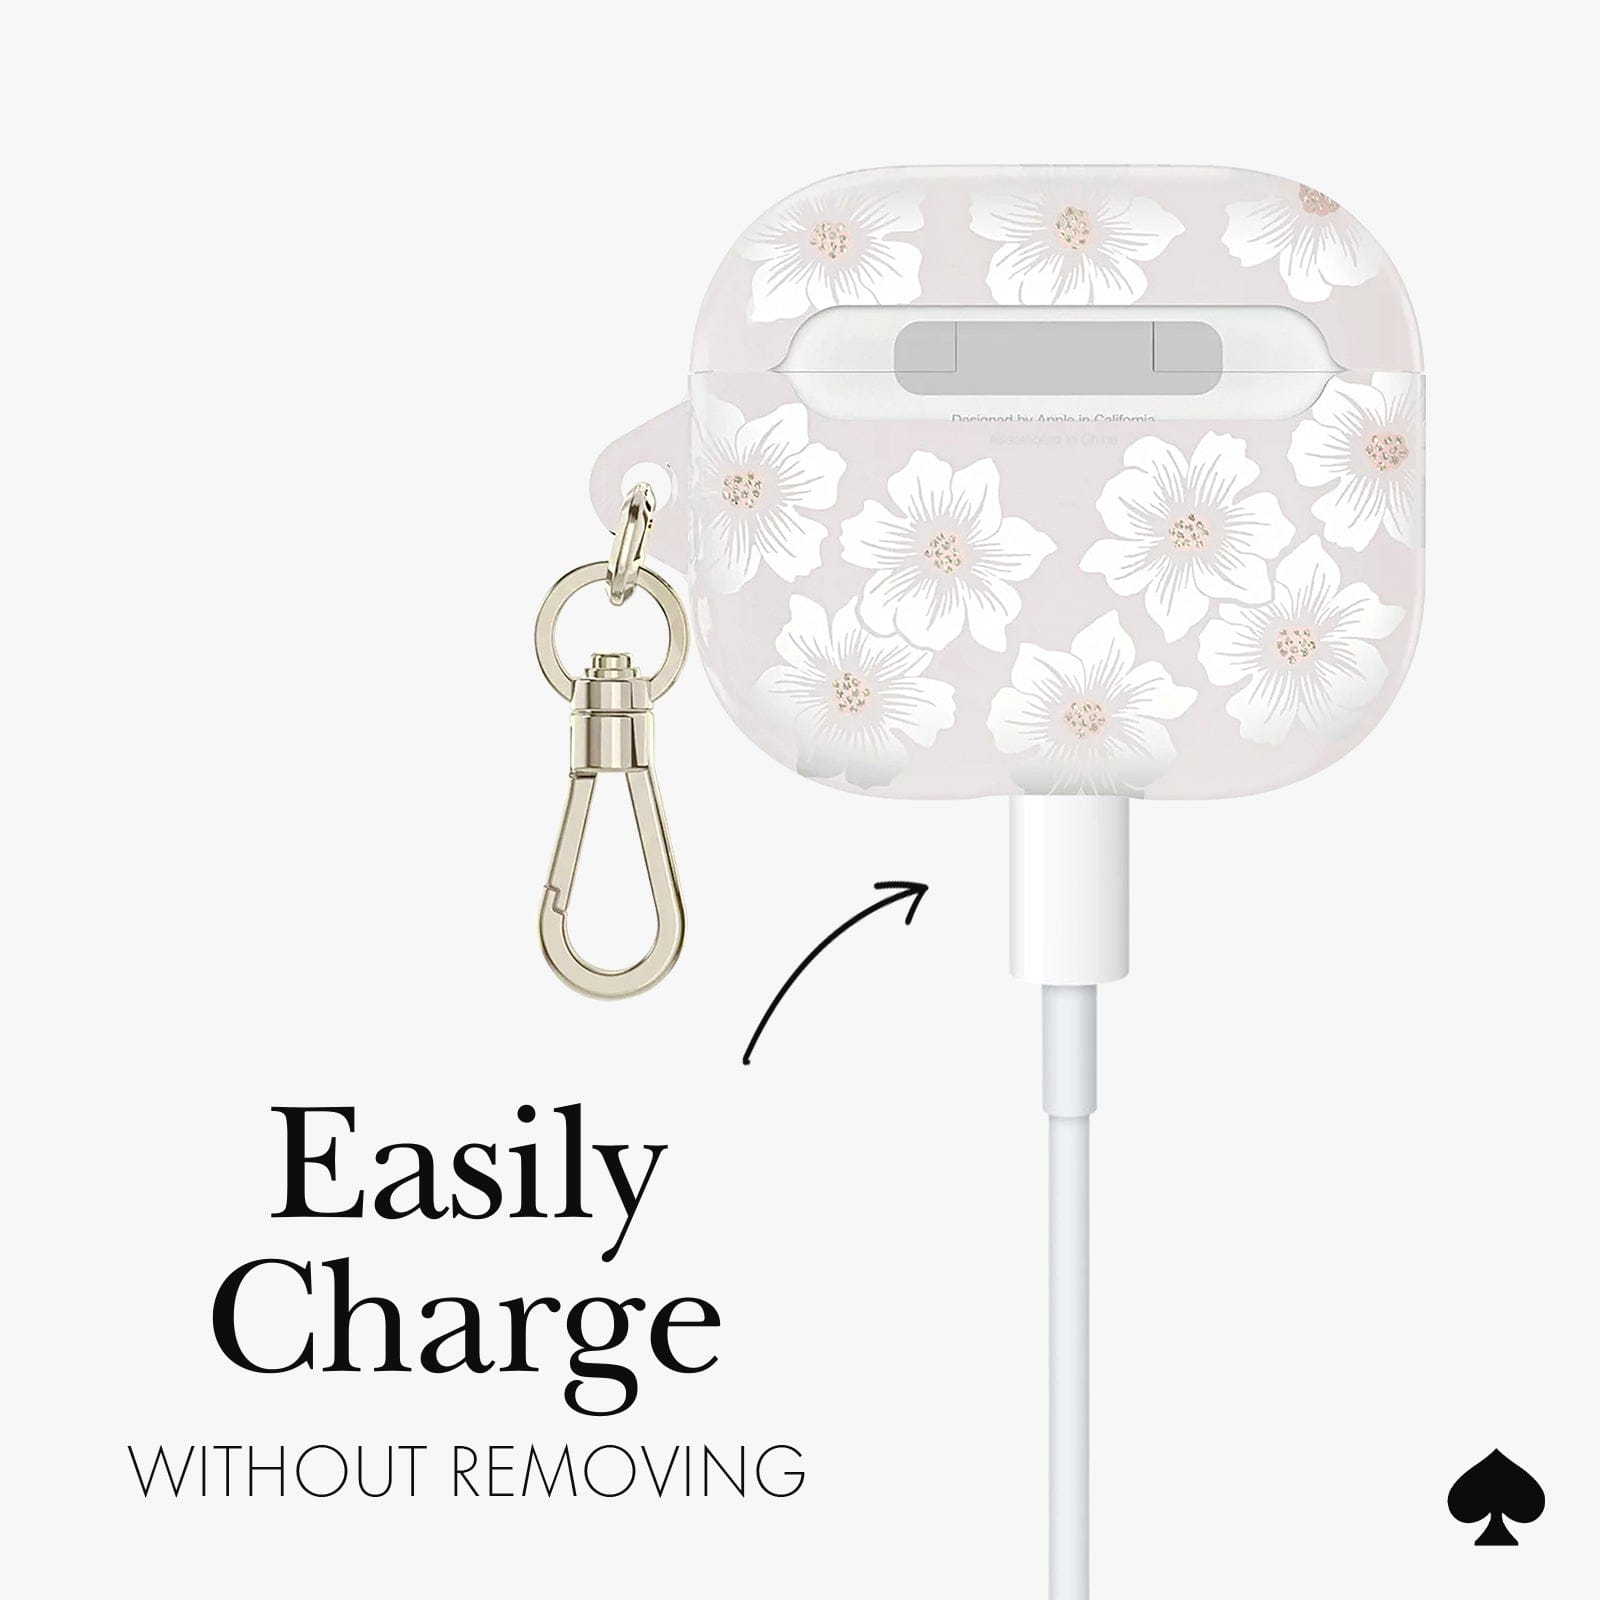 EAsILY CHARGE WITHOUT REMOVING